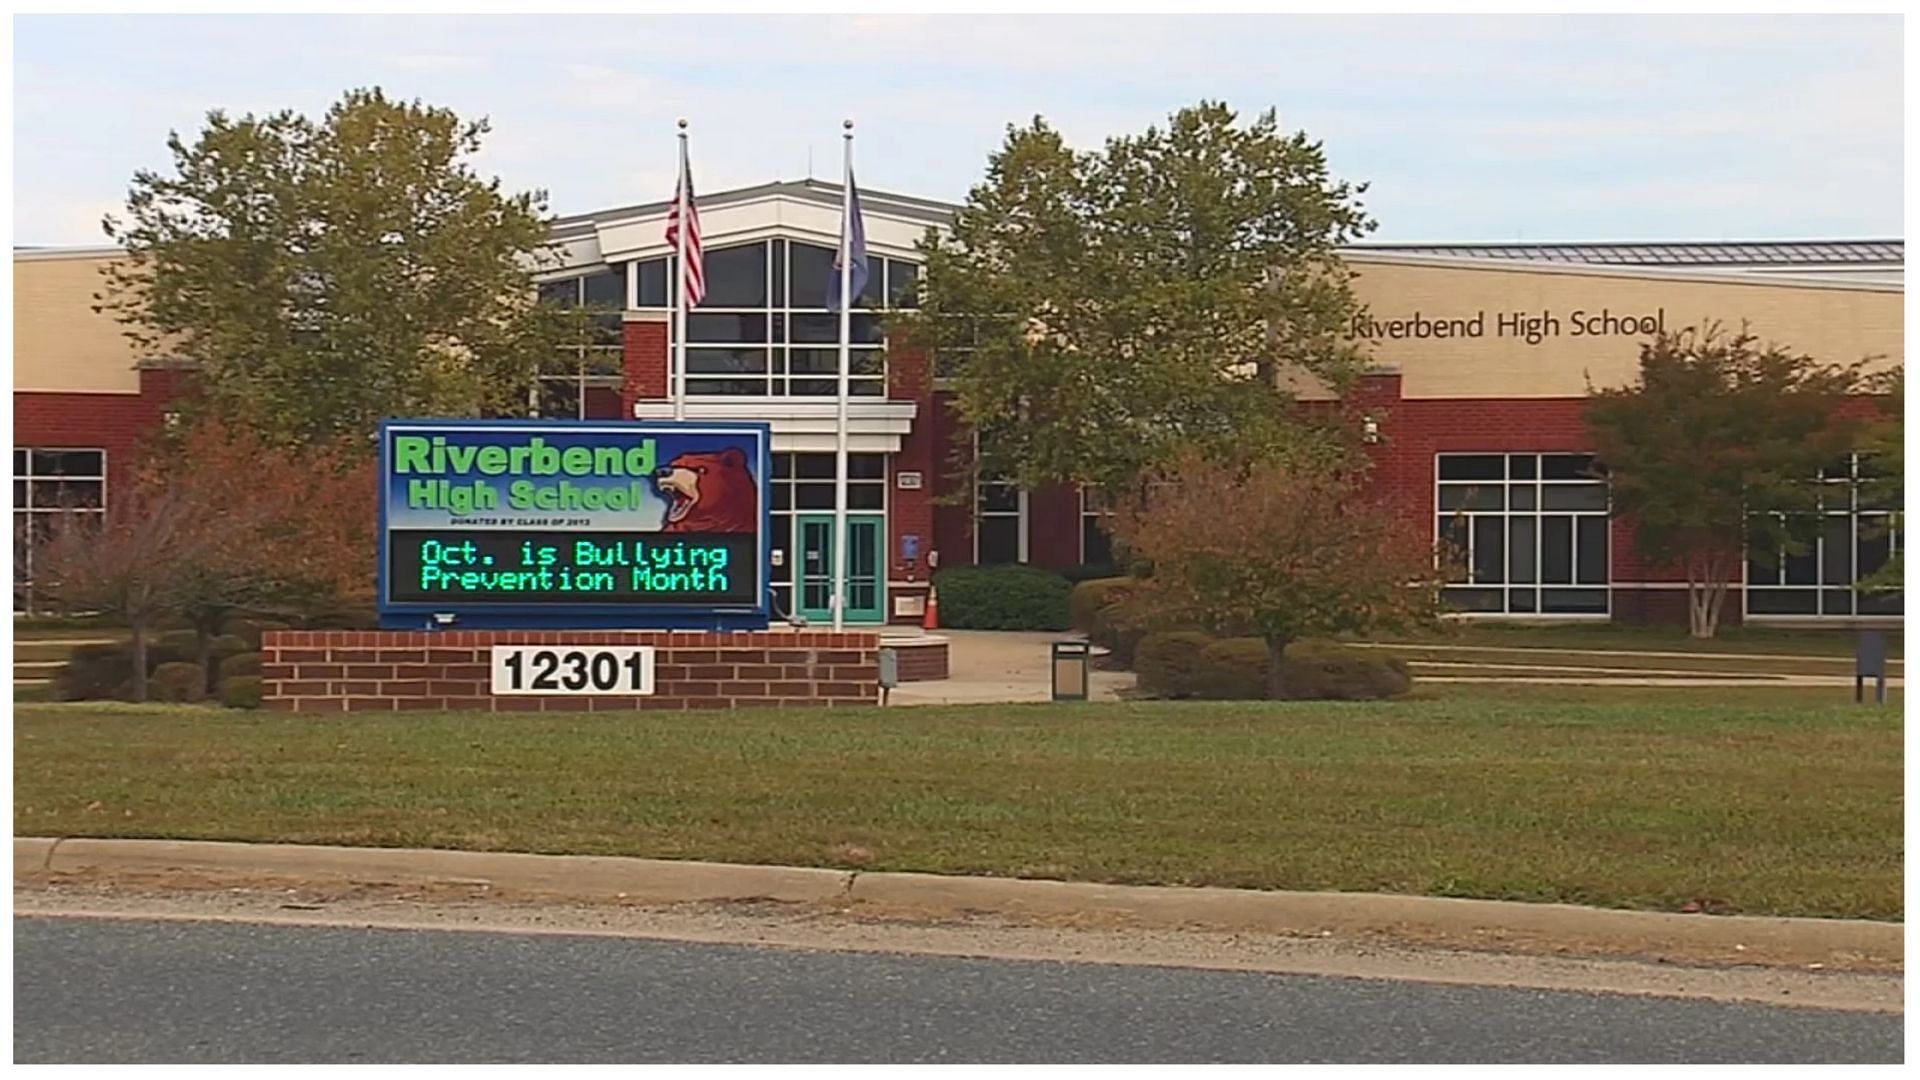 "Worst fears as an educator" Riverbend High School fight sparks